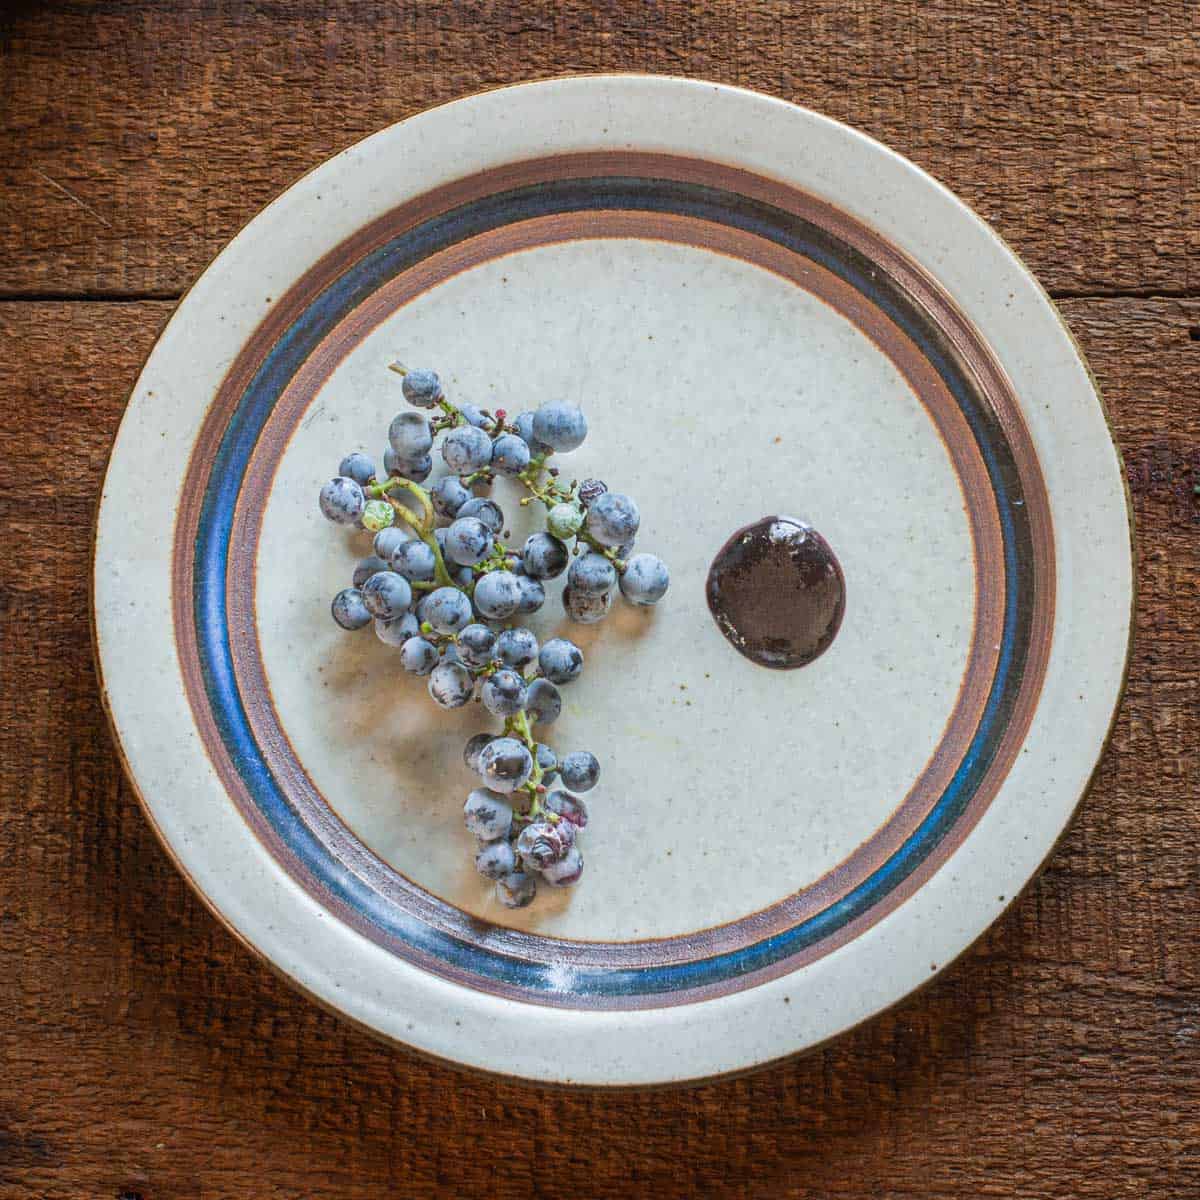 Wild grape molasses or petimezi on a plate next to a cluster of grapes. 